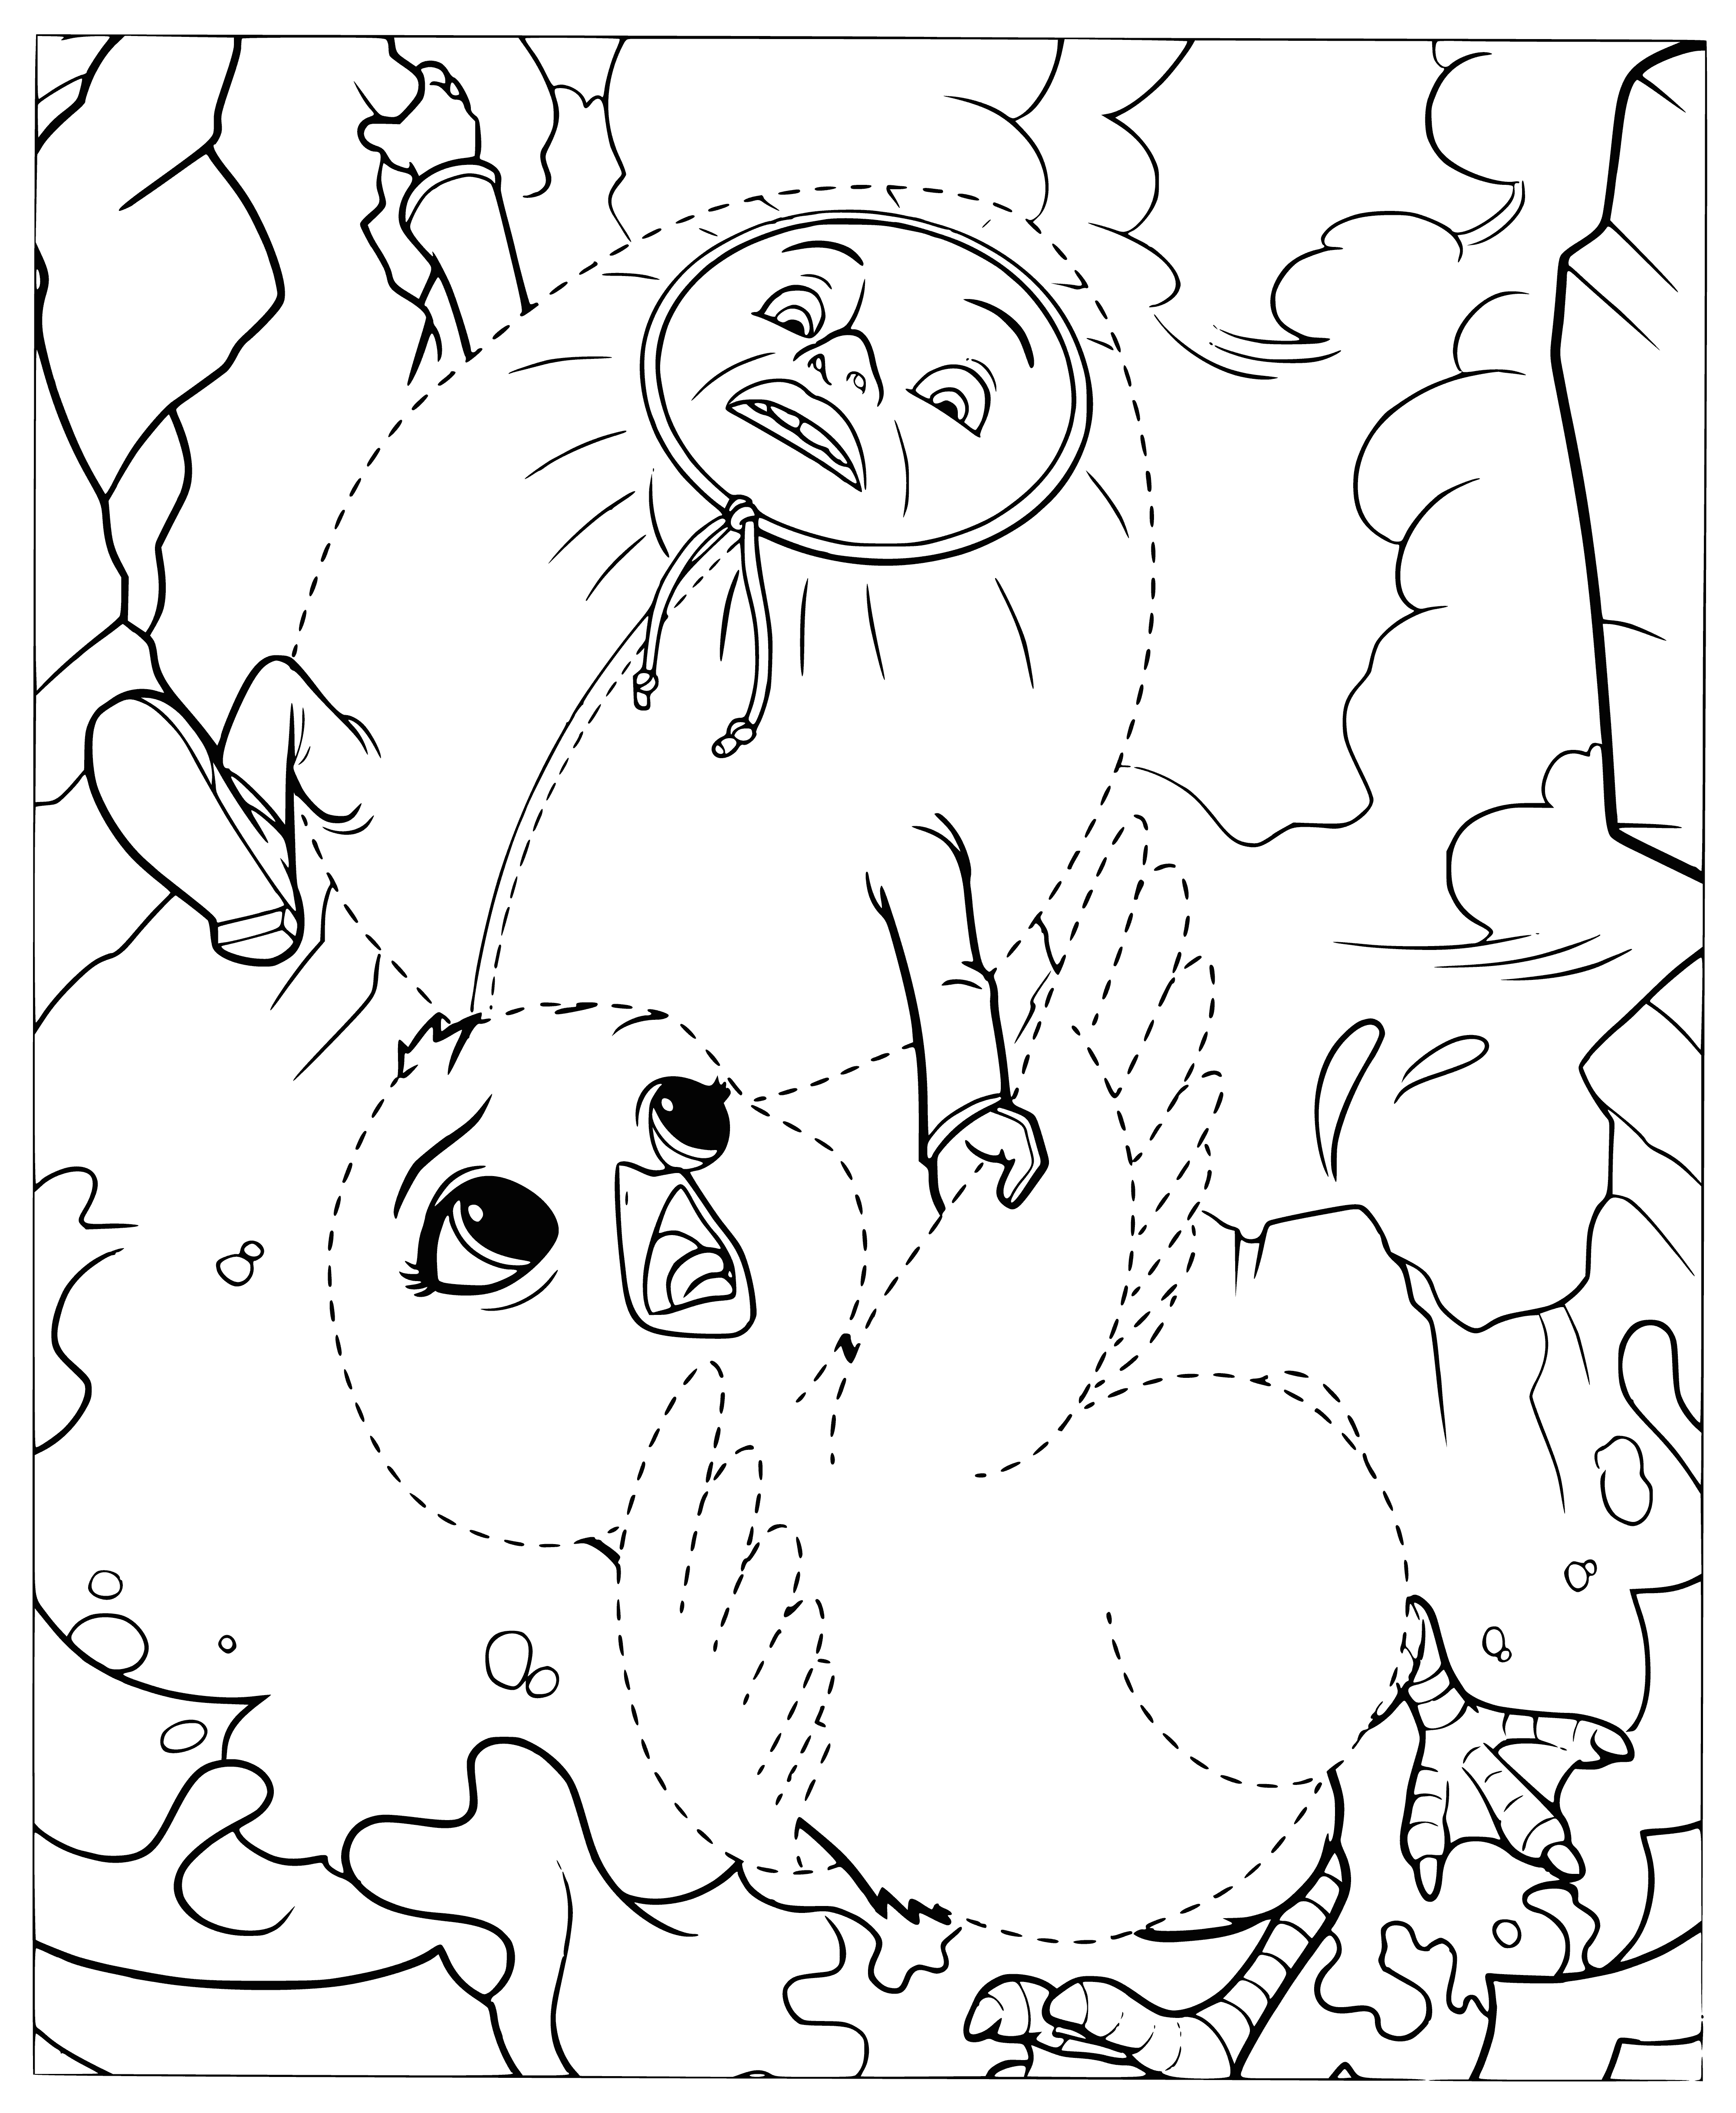 Goose and Shaltay coloring page